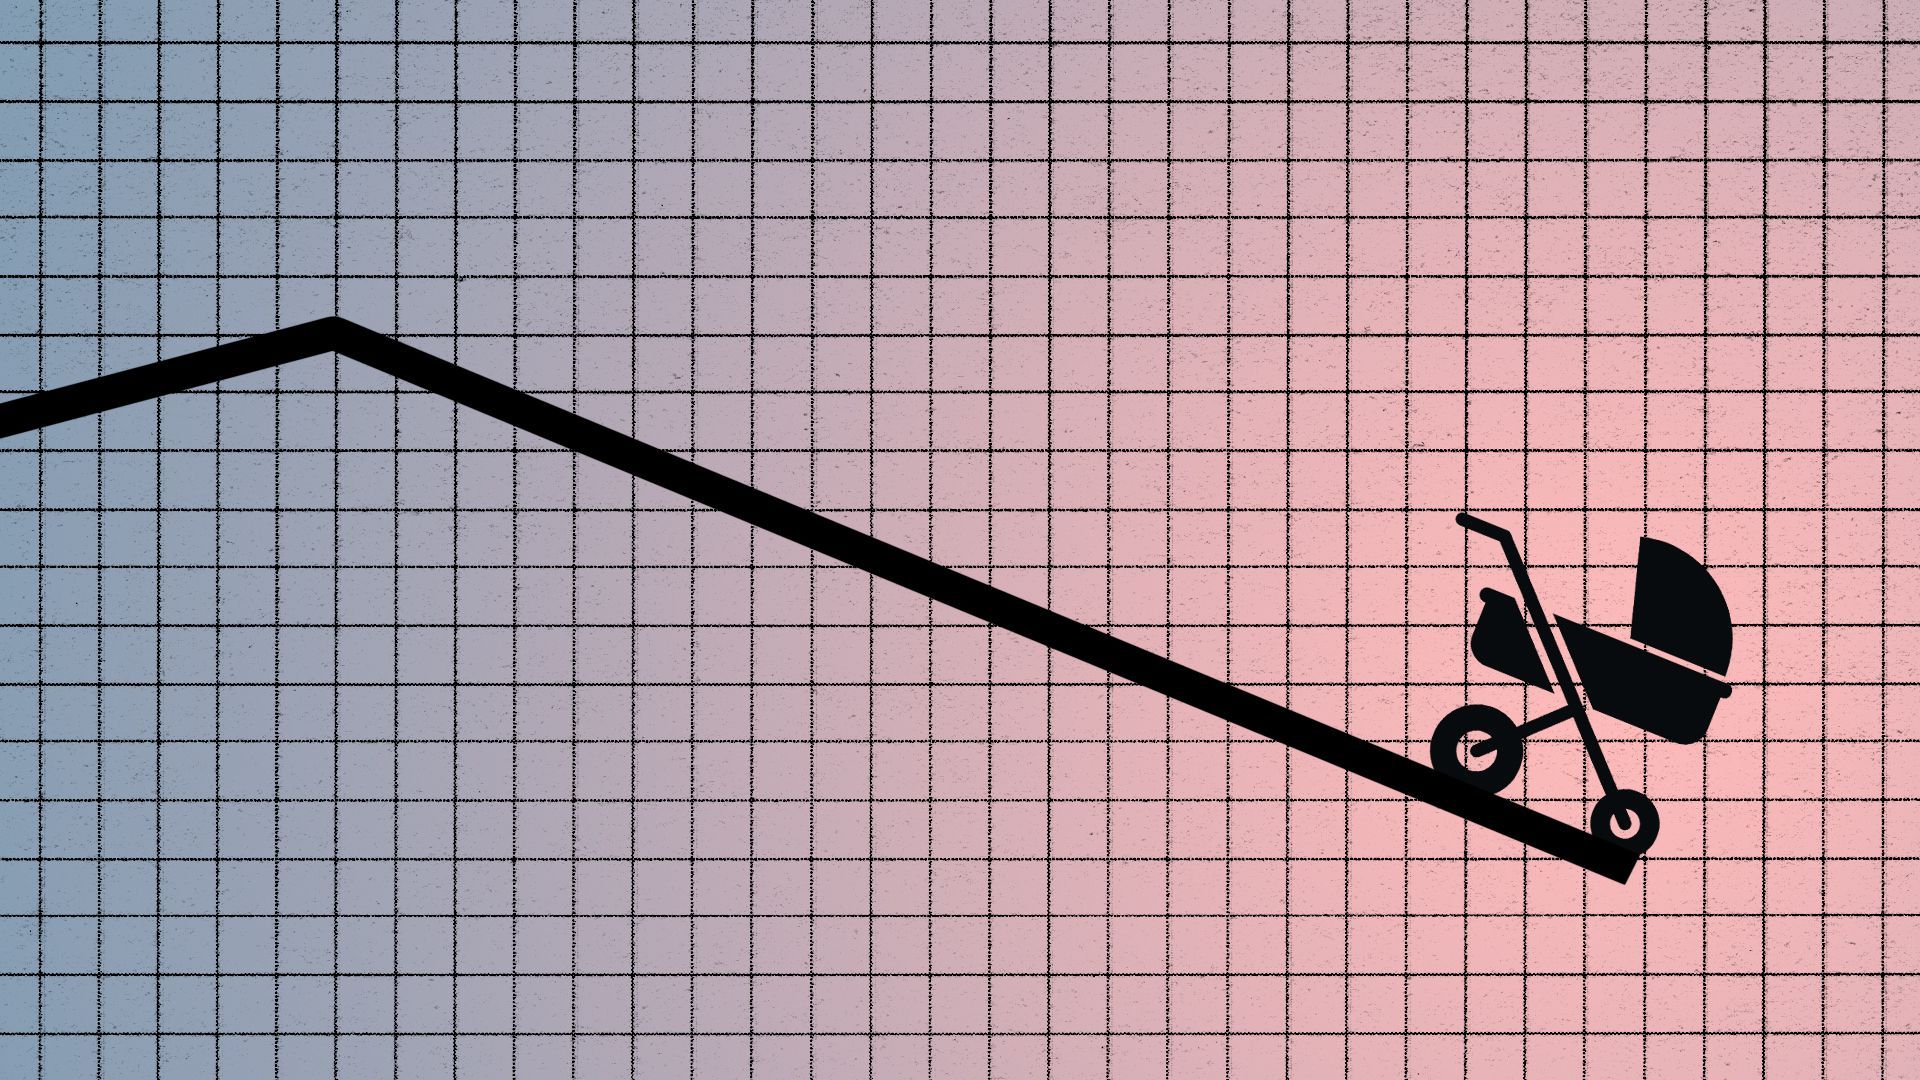 Illustration of a chart trending downward, with a baby stroller icon rolling down it.